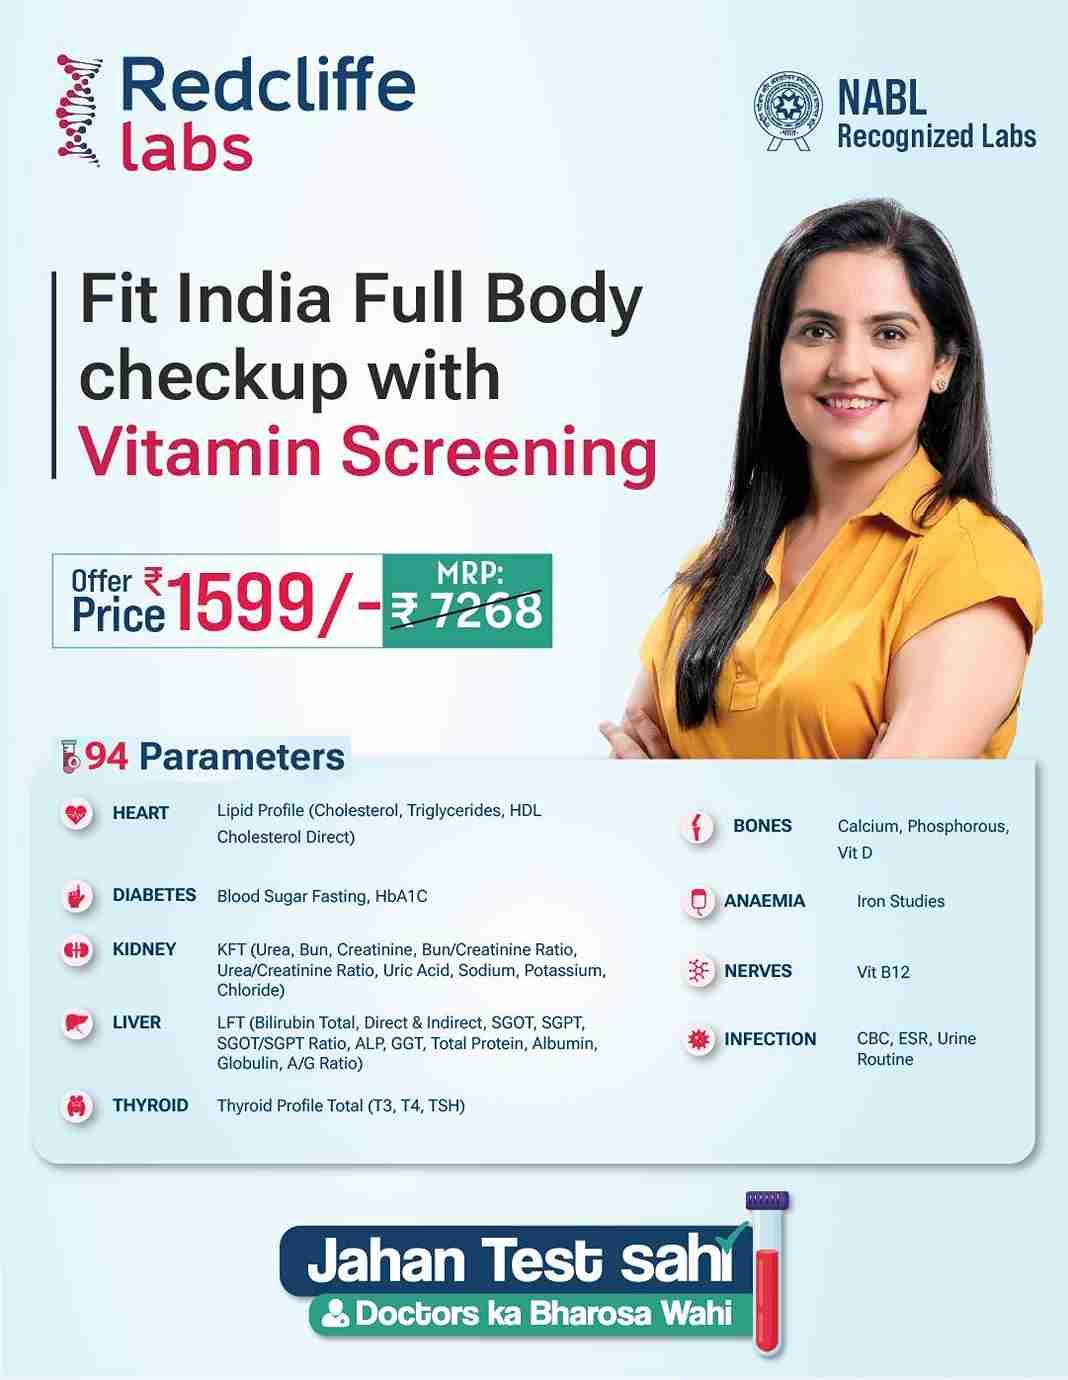 Fit India Full Body checkup with Vitamin Screening in Bangalore